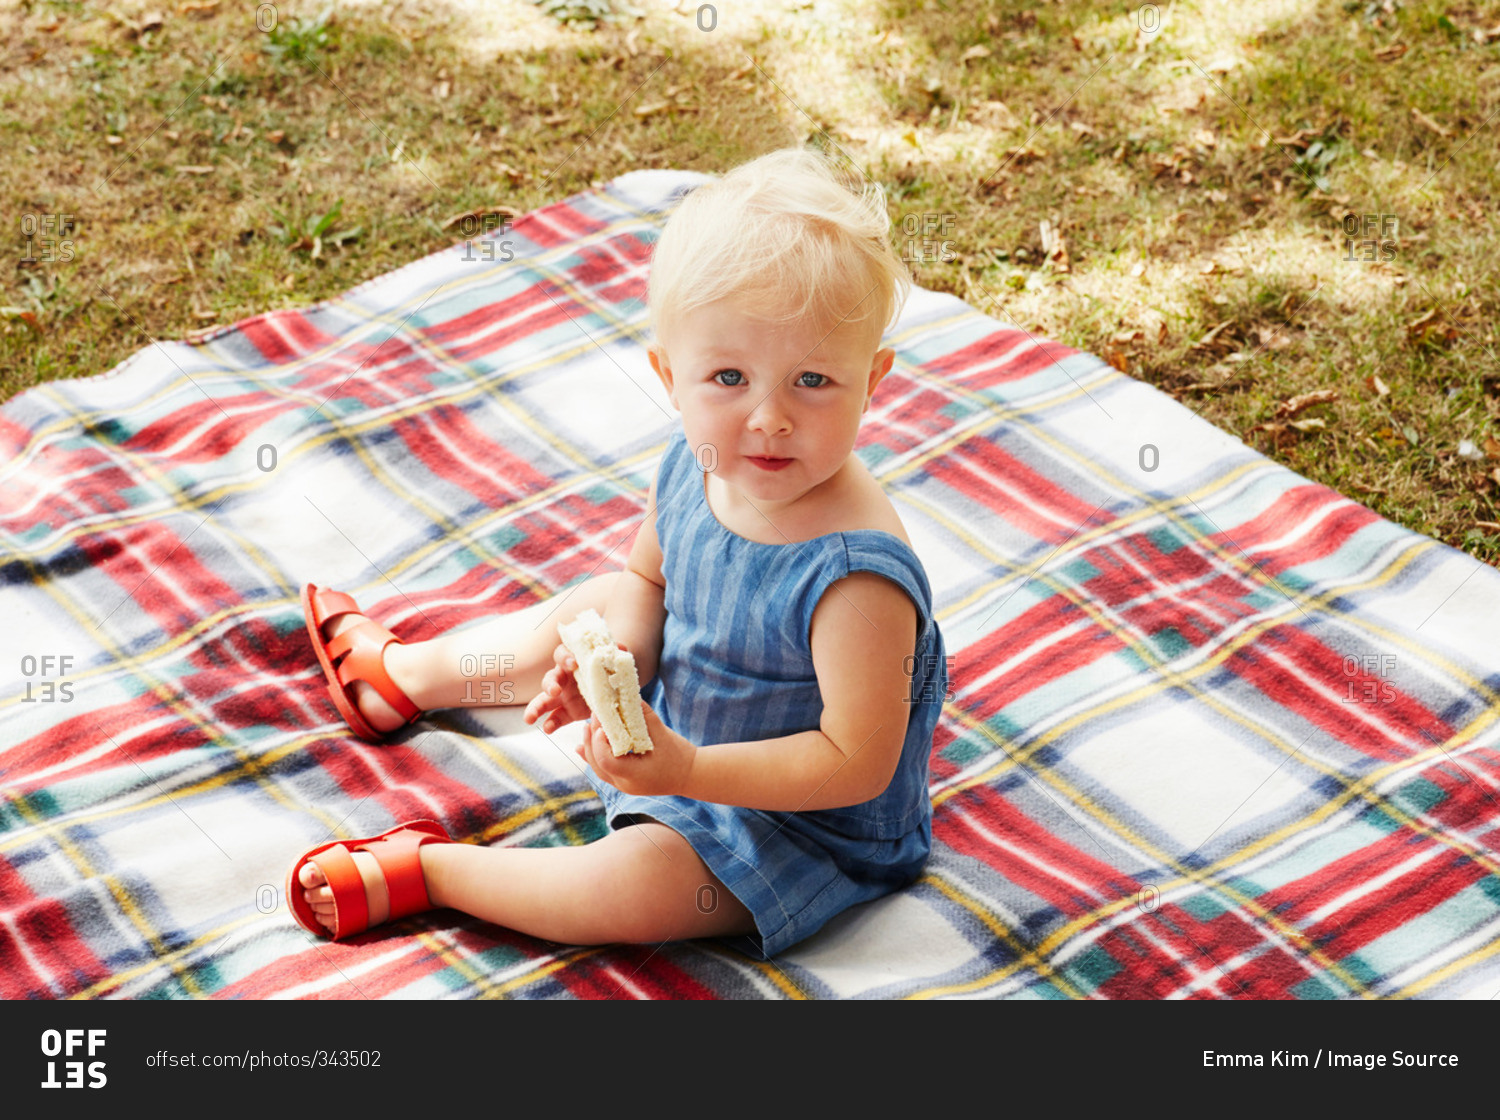 High angle view of baby girl sitting on picnic blanket looking ahead